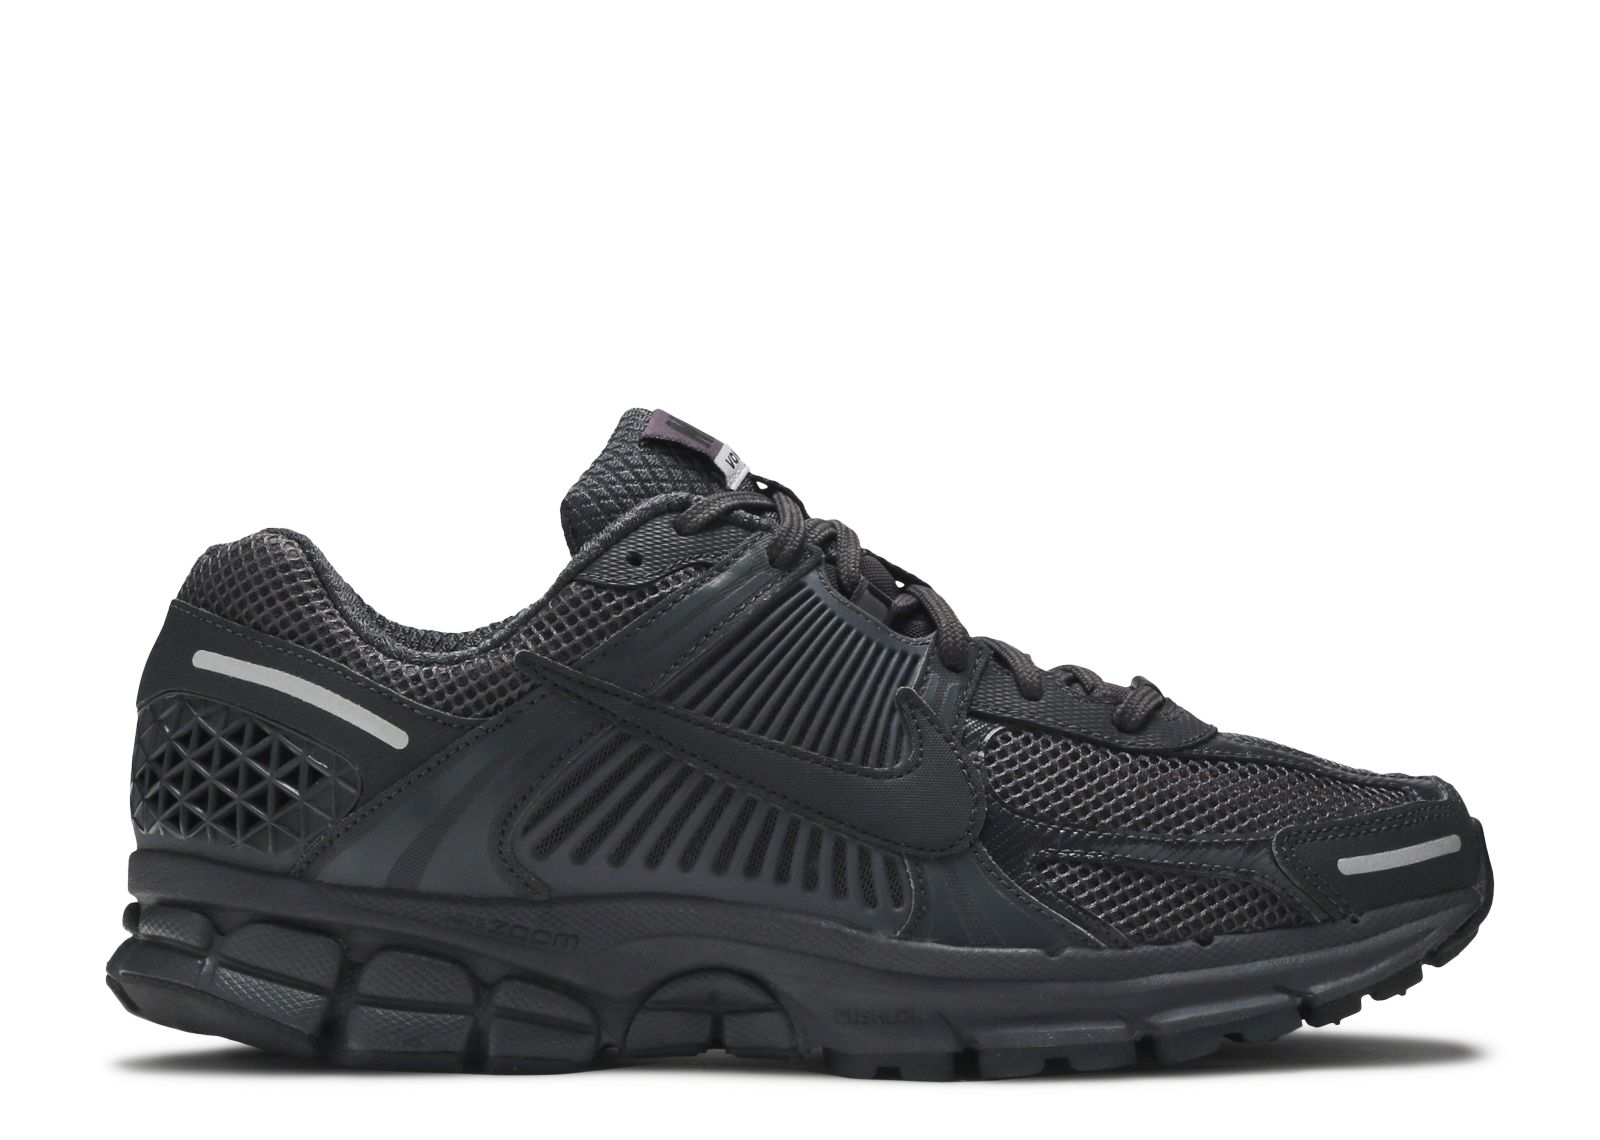 Кроссовки Nike Air Zoom Vomero 5 'Anthracite' 2019, черный nike original new arrival 2018 air zoom vomero 12 men s running shoes breathable outdoor sneakers 863762 001